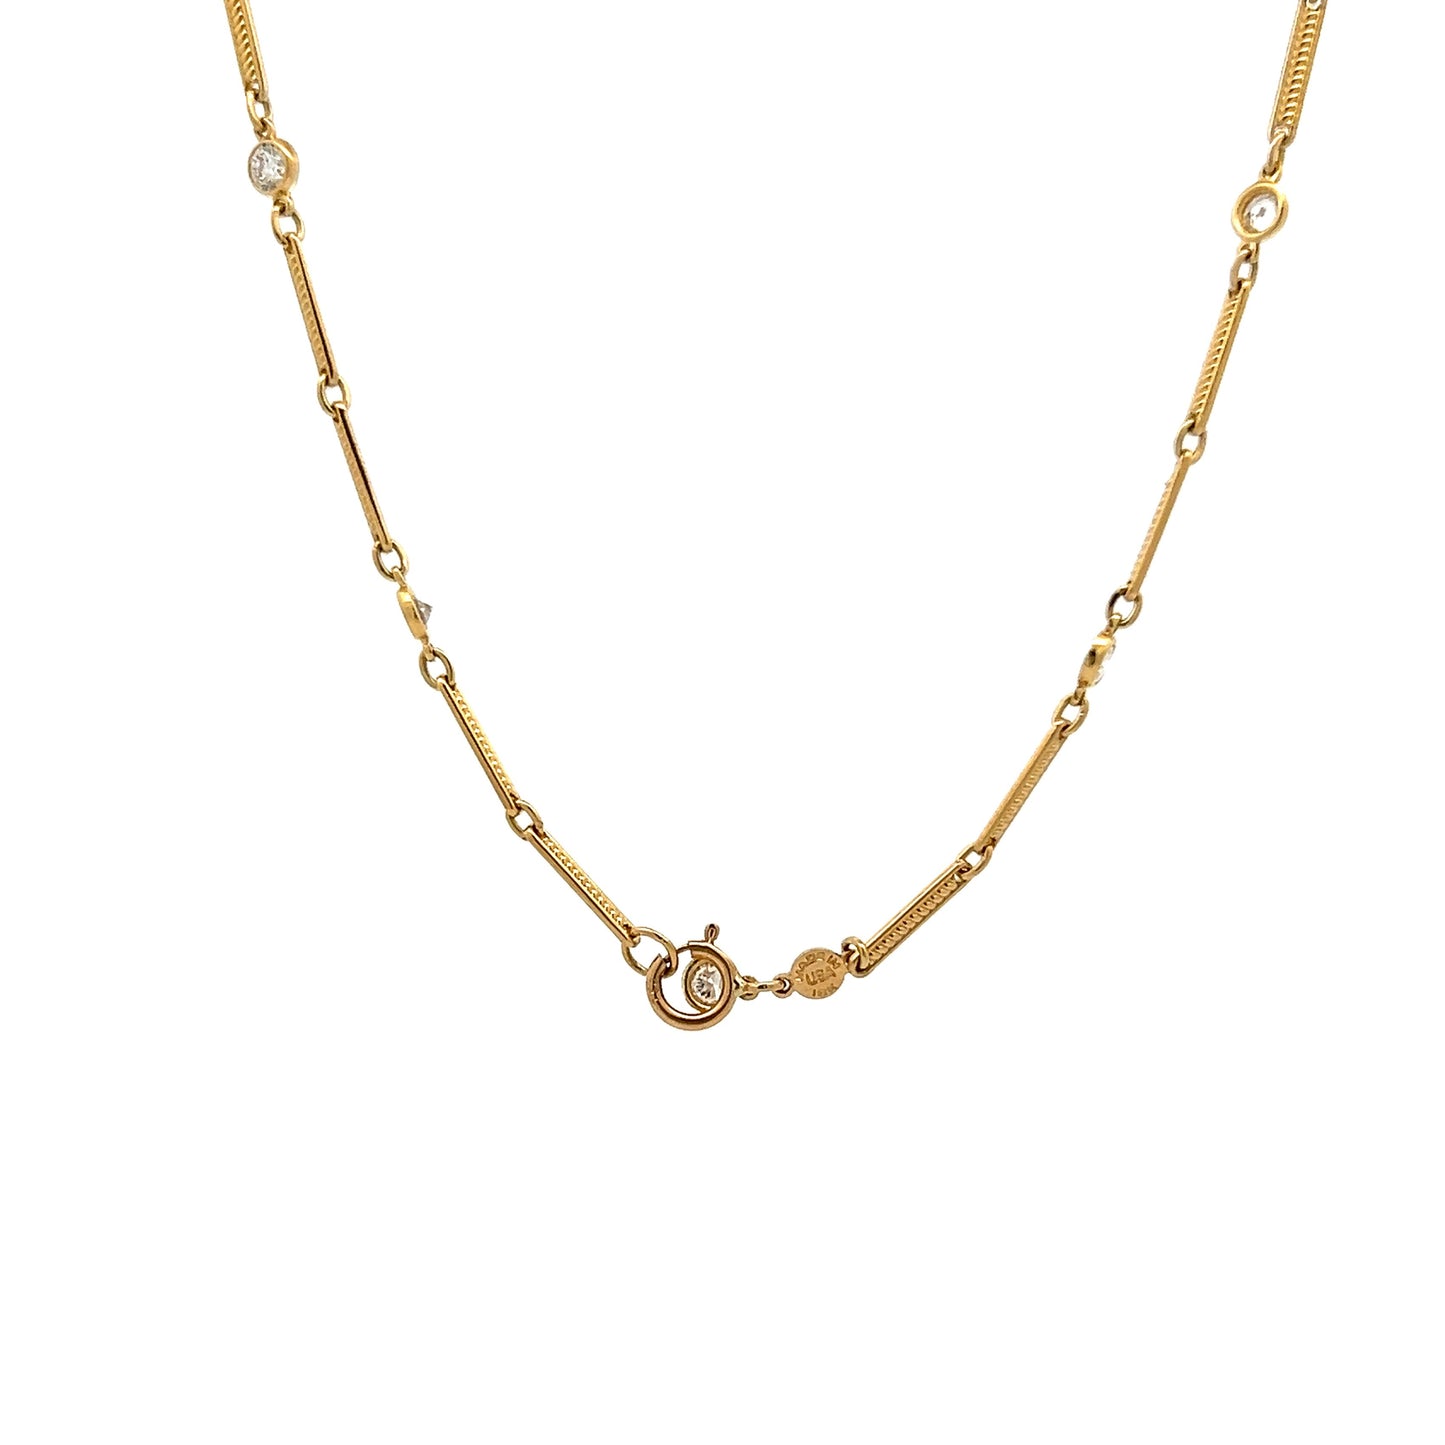 Diamond & Turquoise Chain Necklace in 18k Yellow Gold